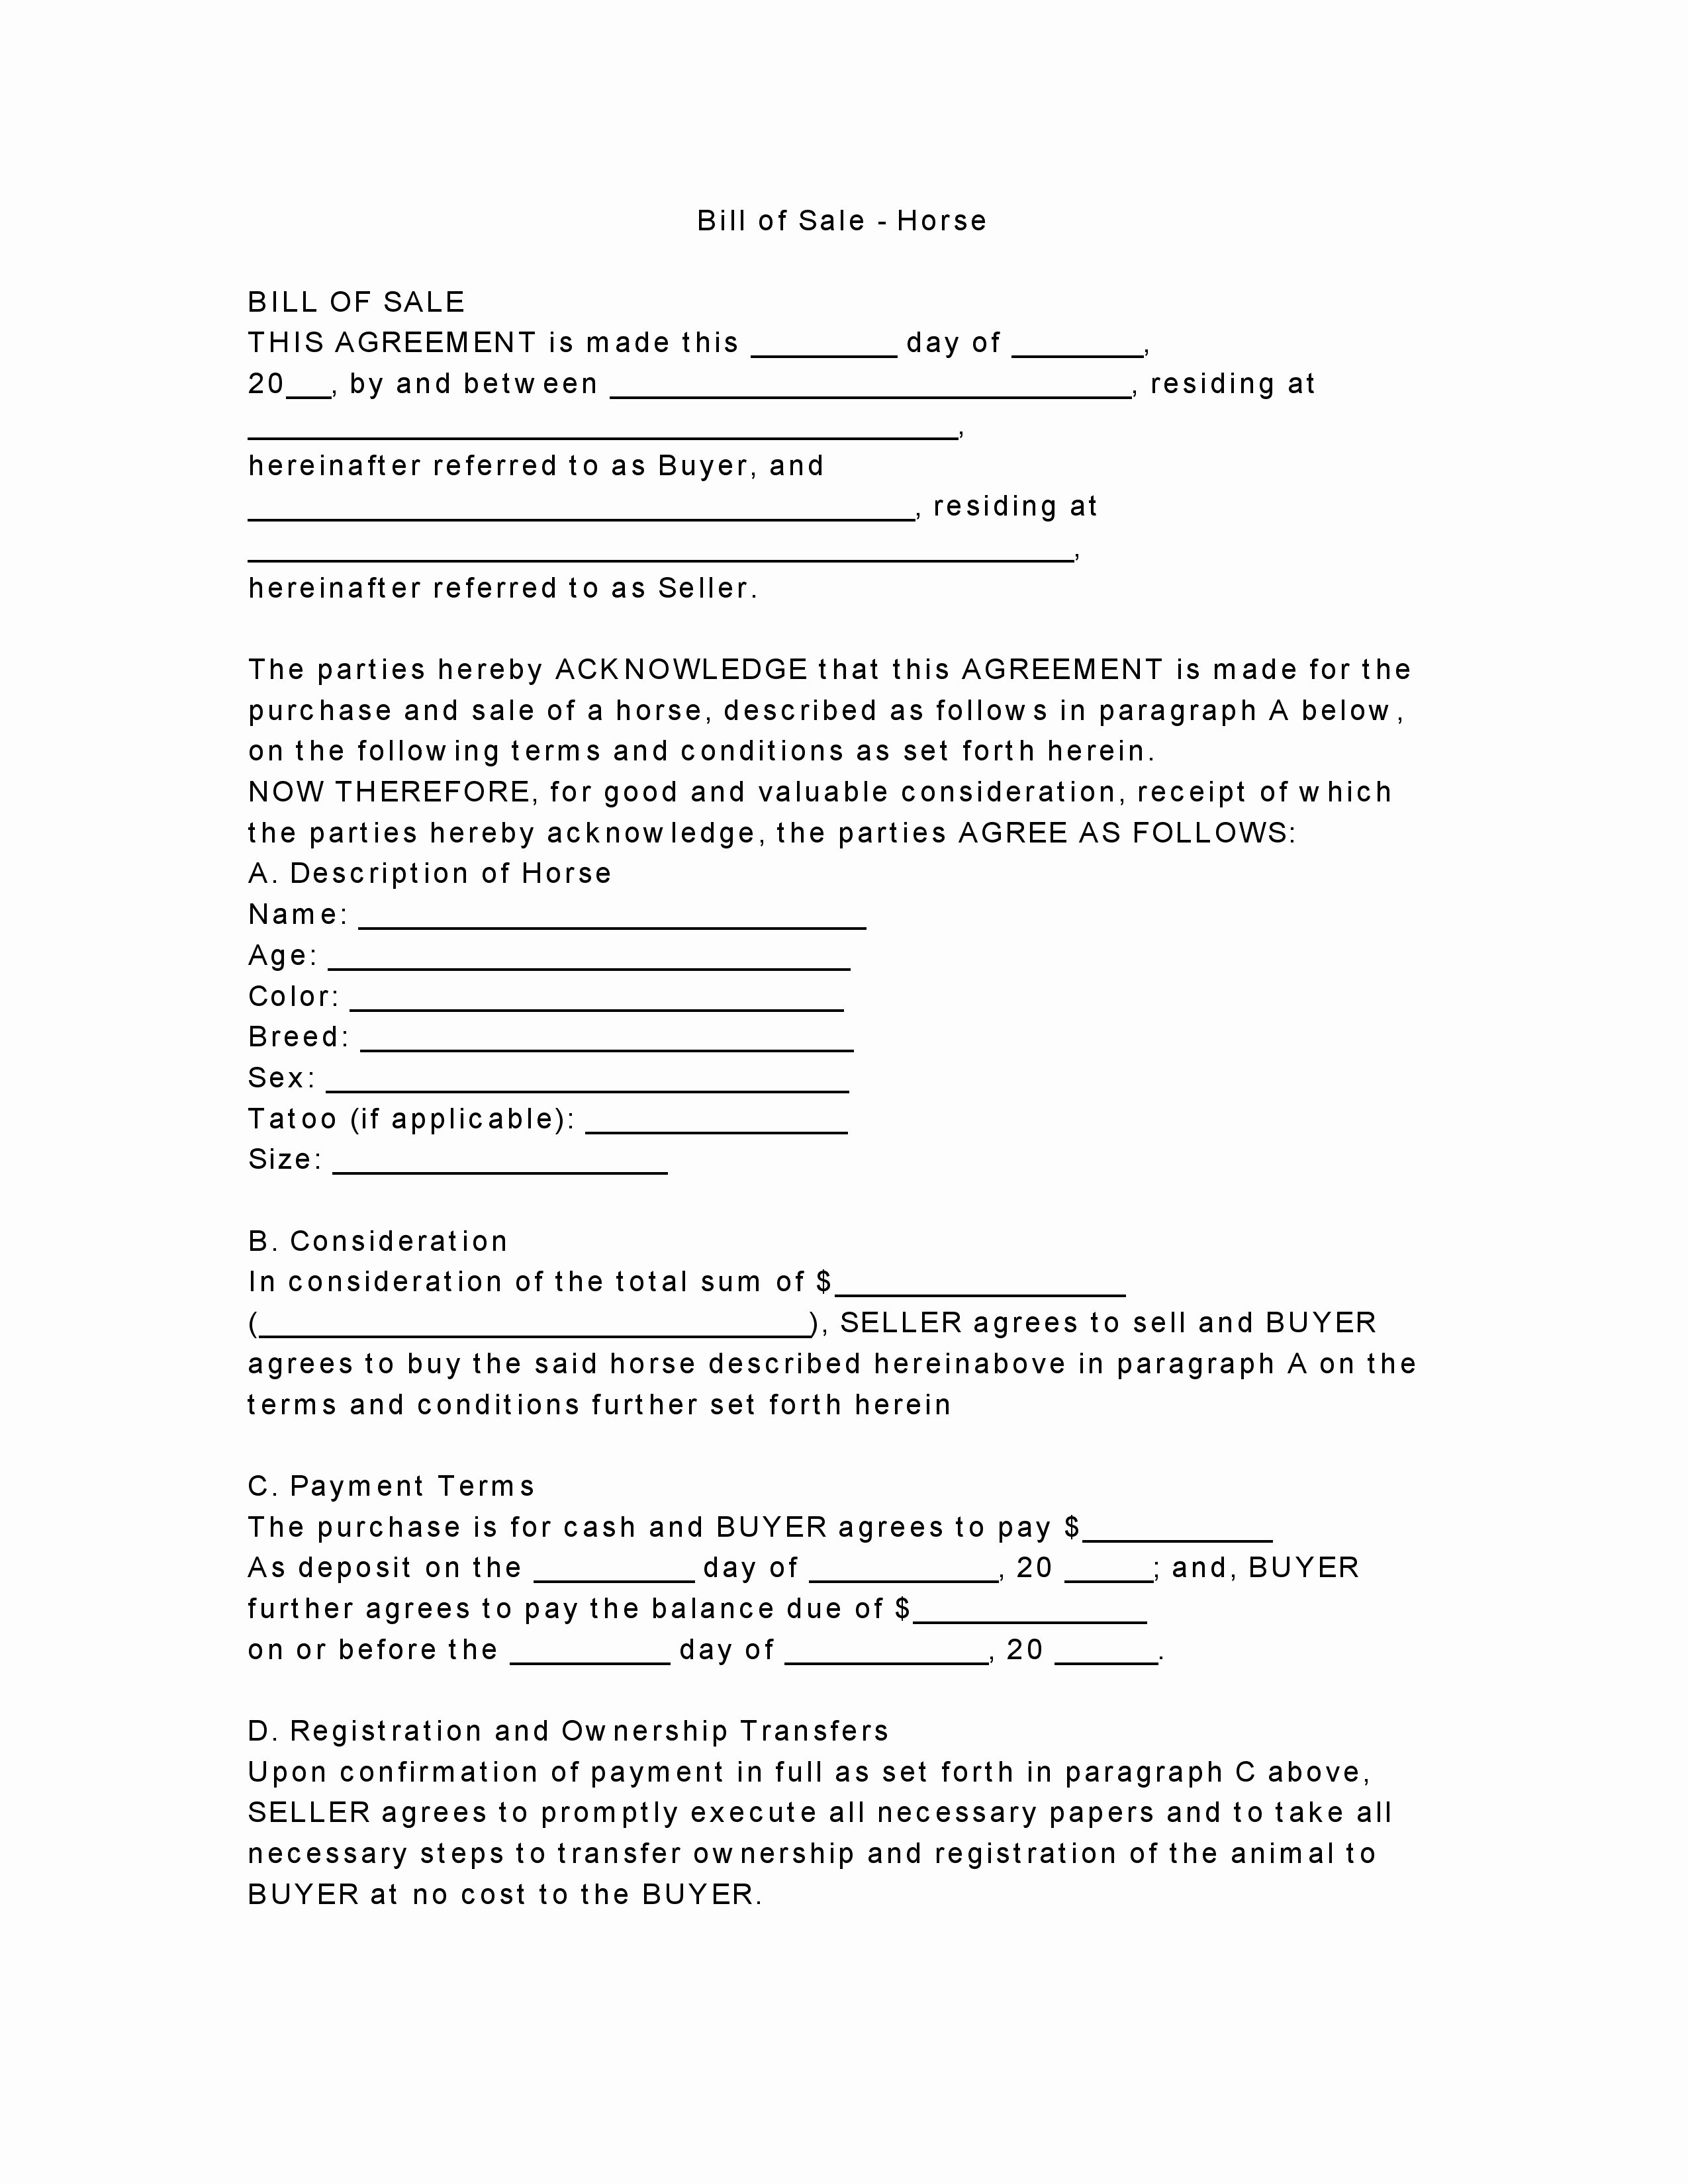 Transfer Of Business Ownership Agreement Template Inspirational Free Horse Bill Of Sale form Pdf Word